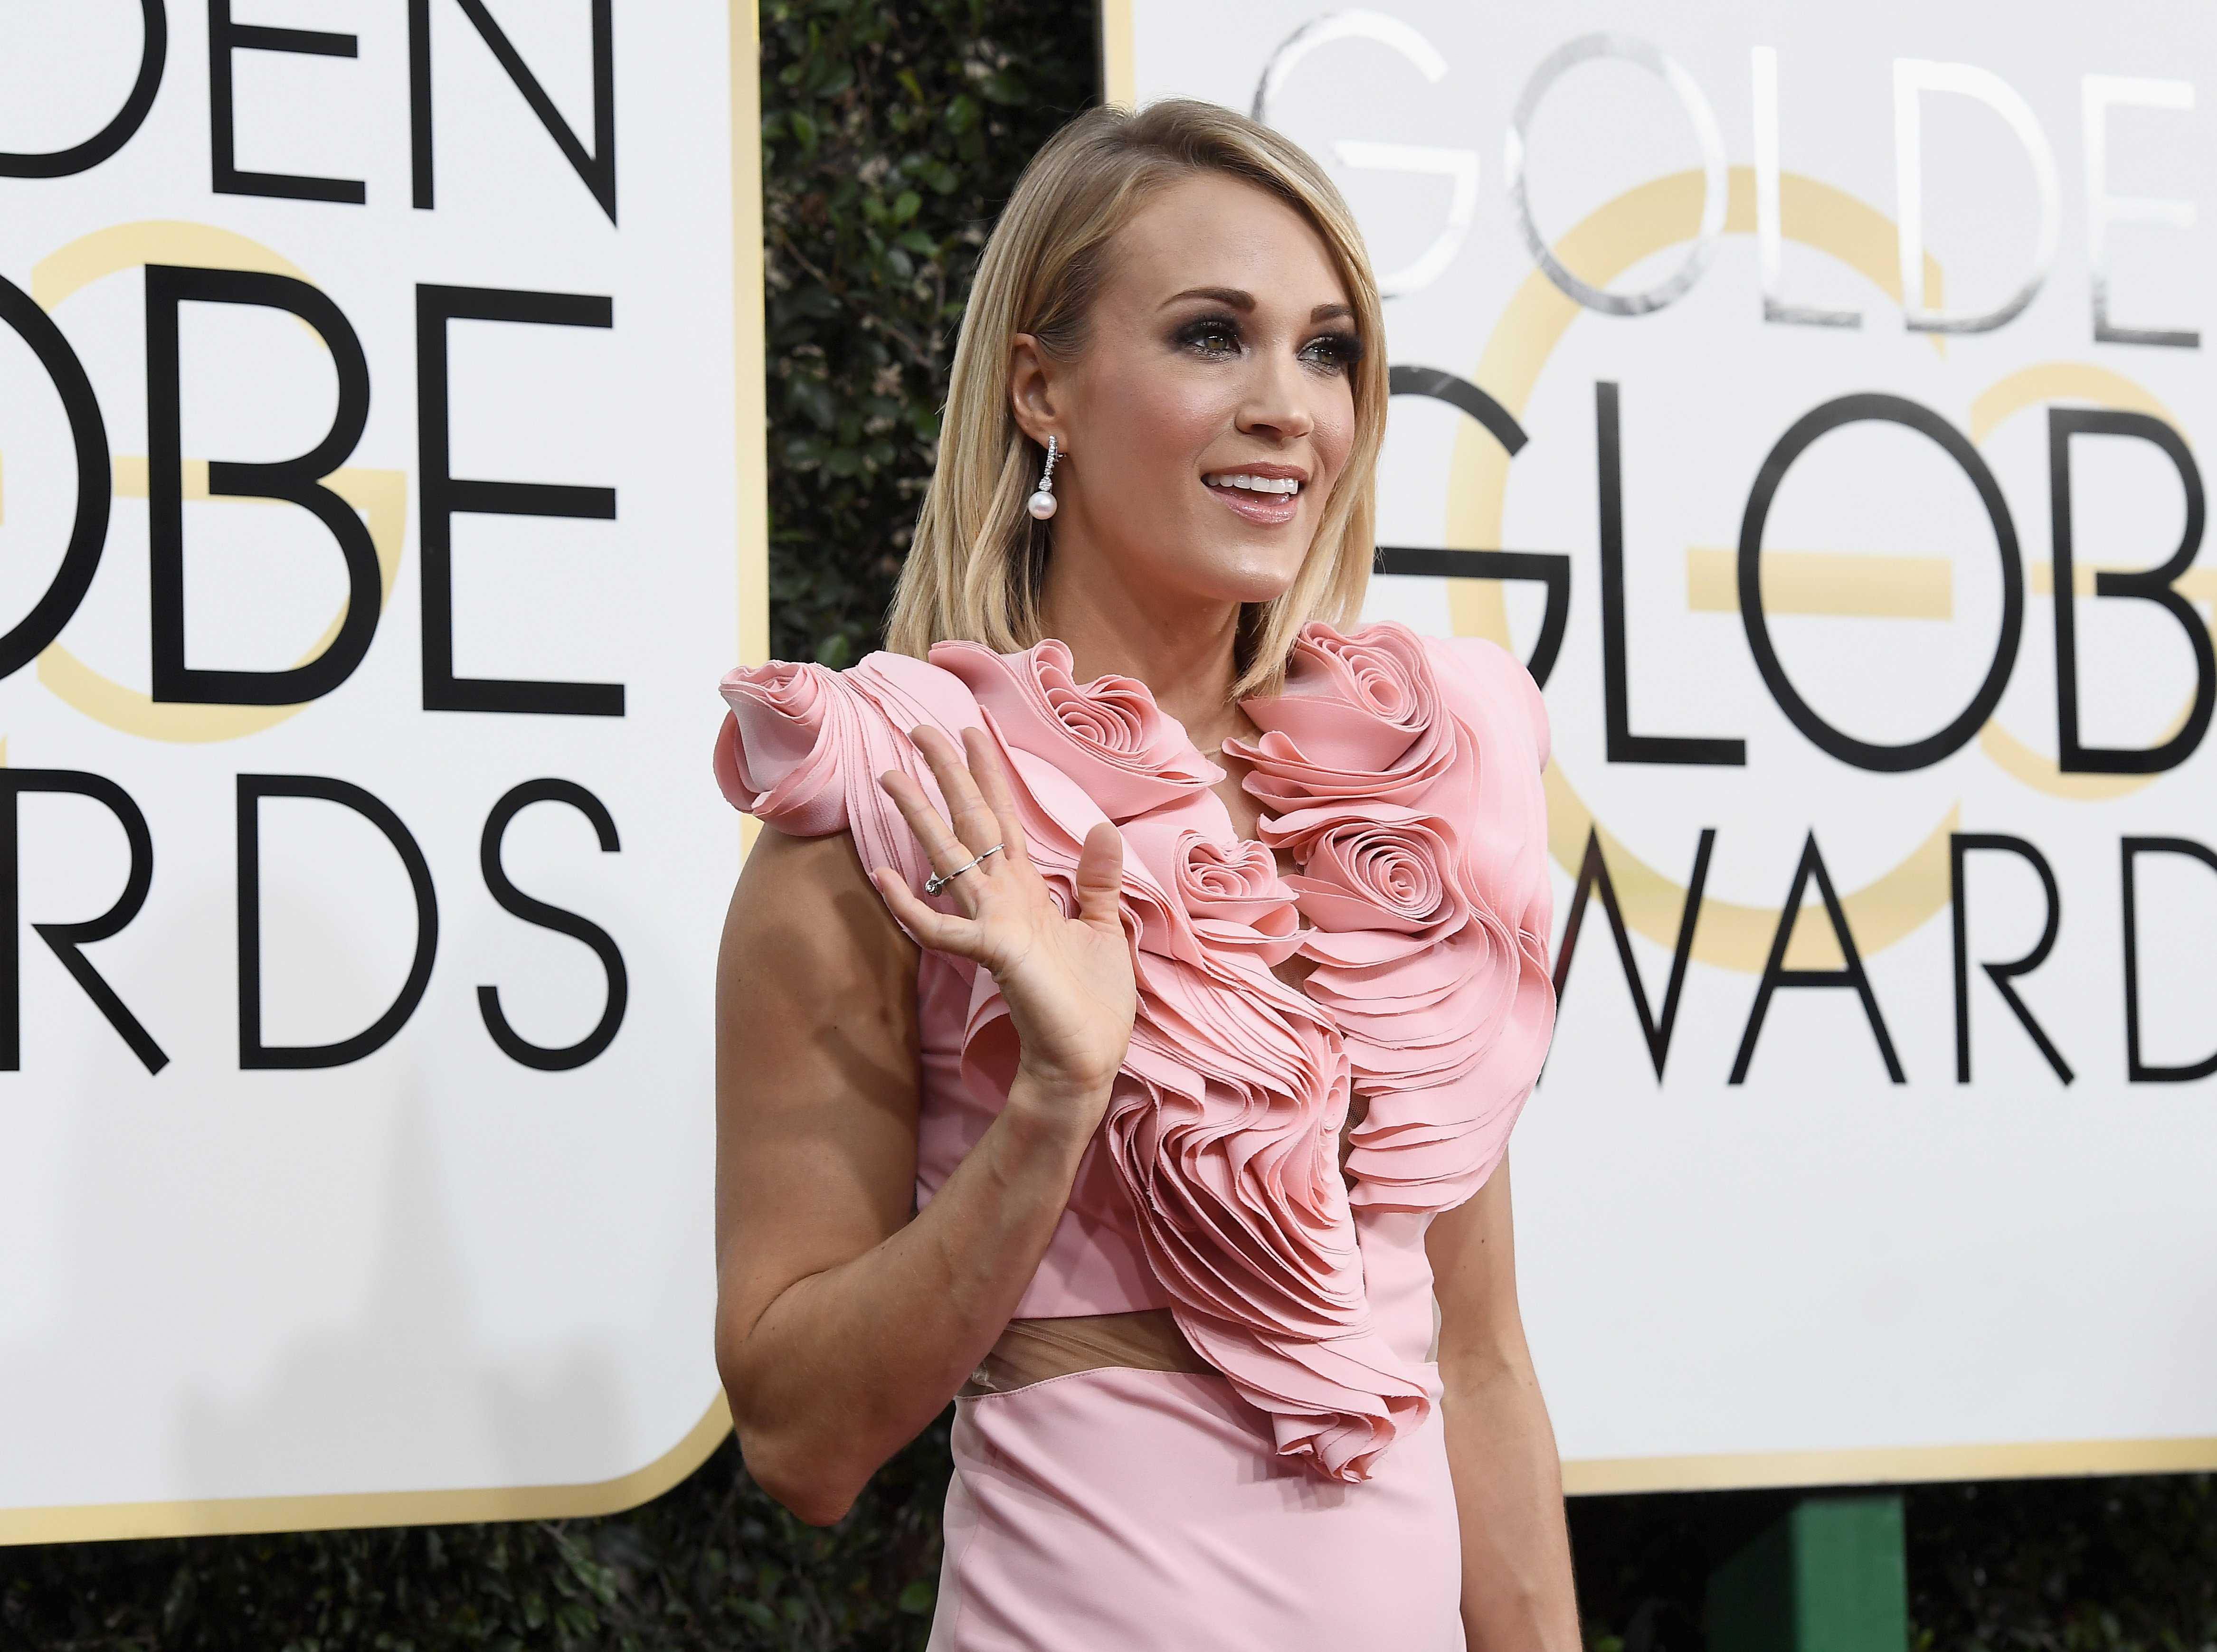 Carrie Underwood arrives to the 74th Annual Golden Globe Awards held at the Beverly Hilton Hotel on January 8, 2017 | Source: Getty Images